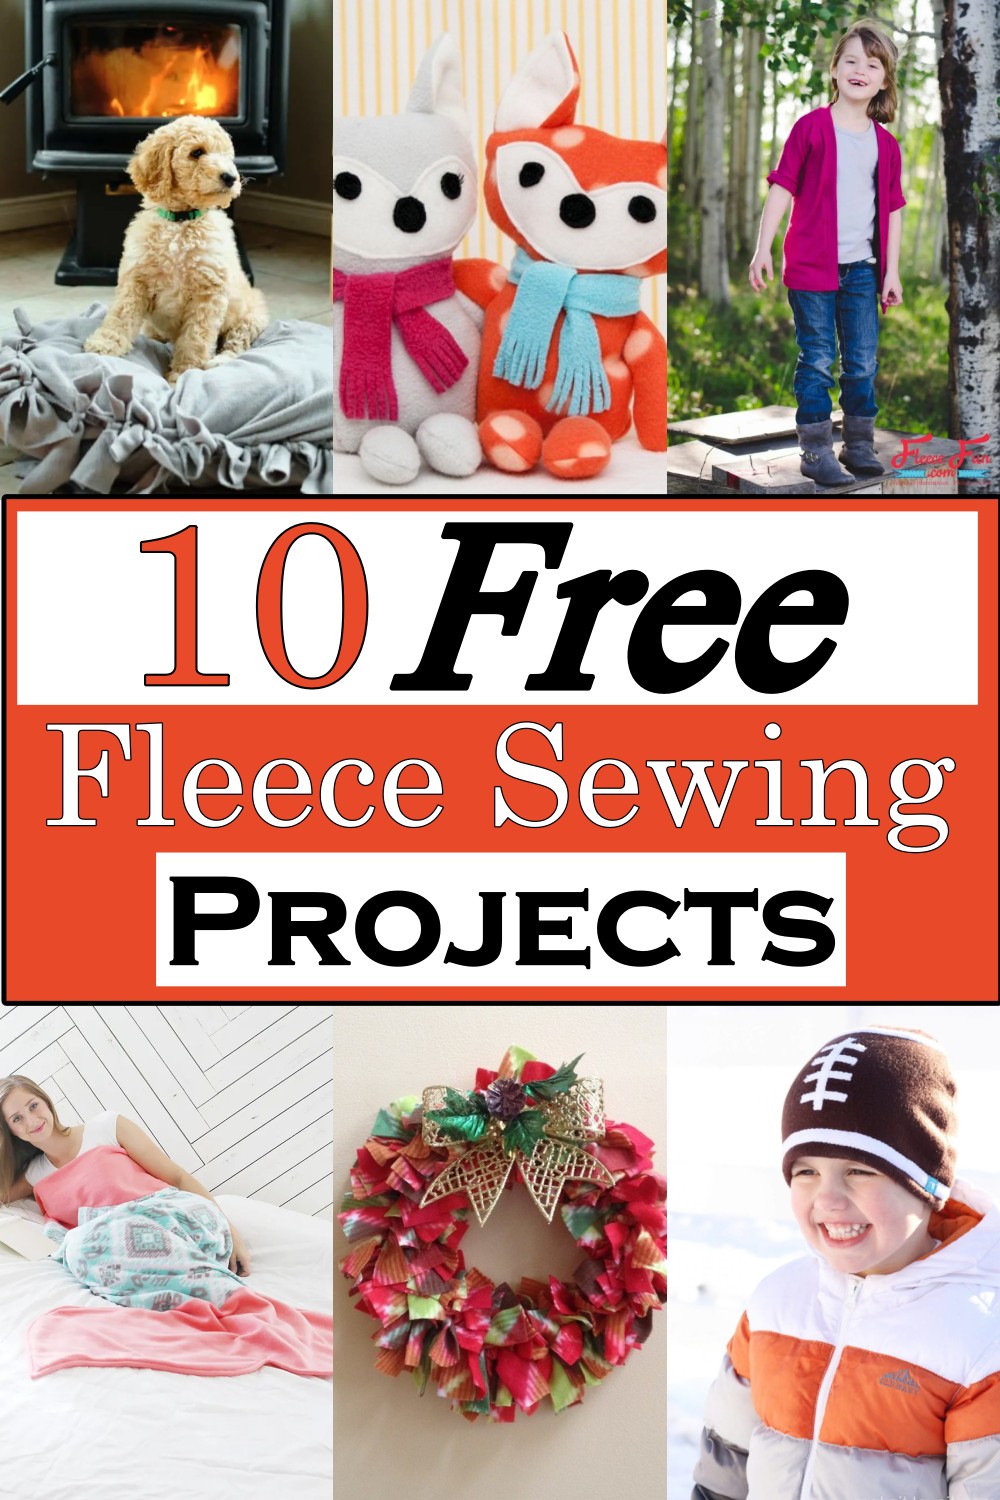 Free Fleece Sewing Projects 2